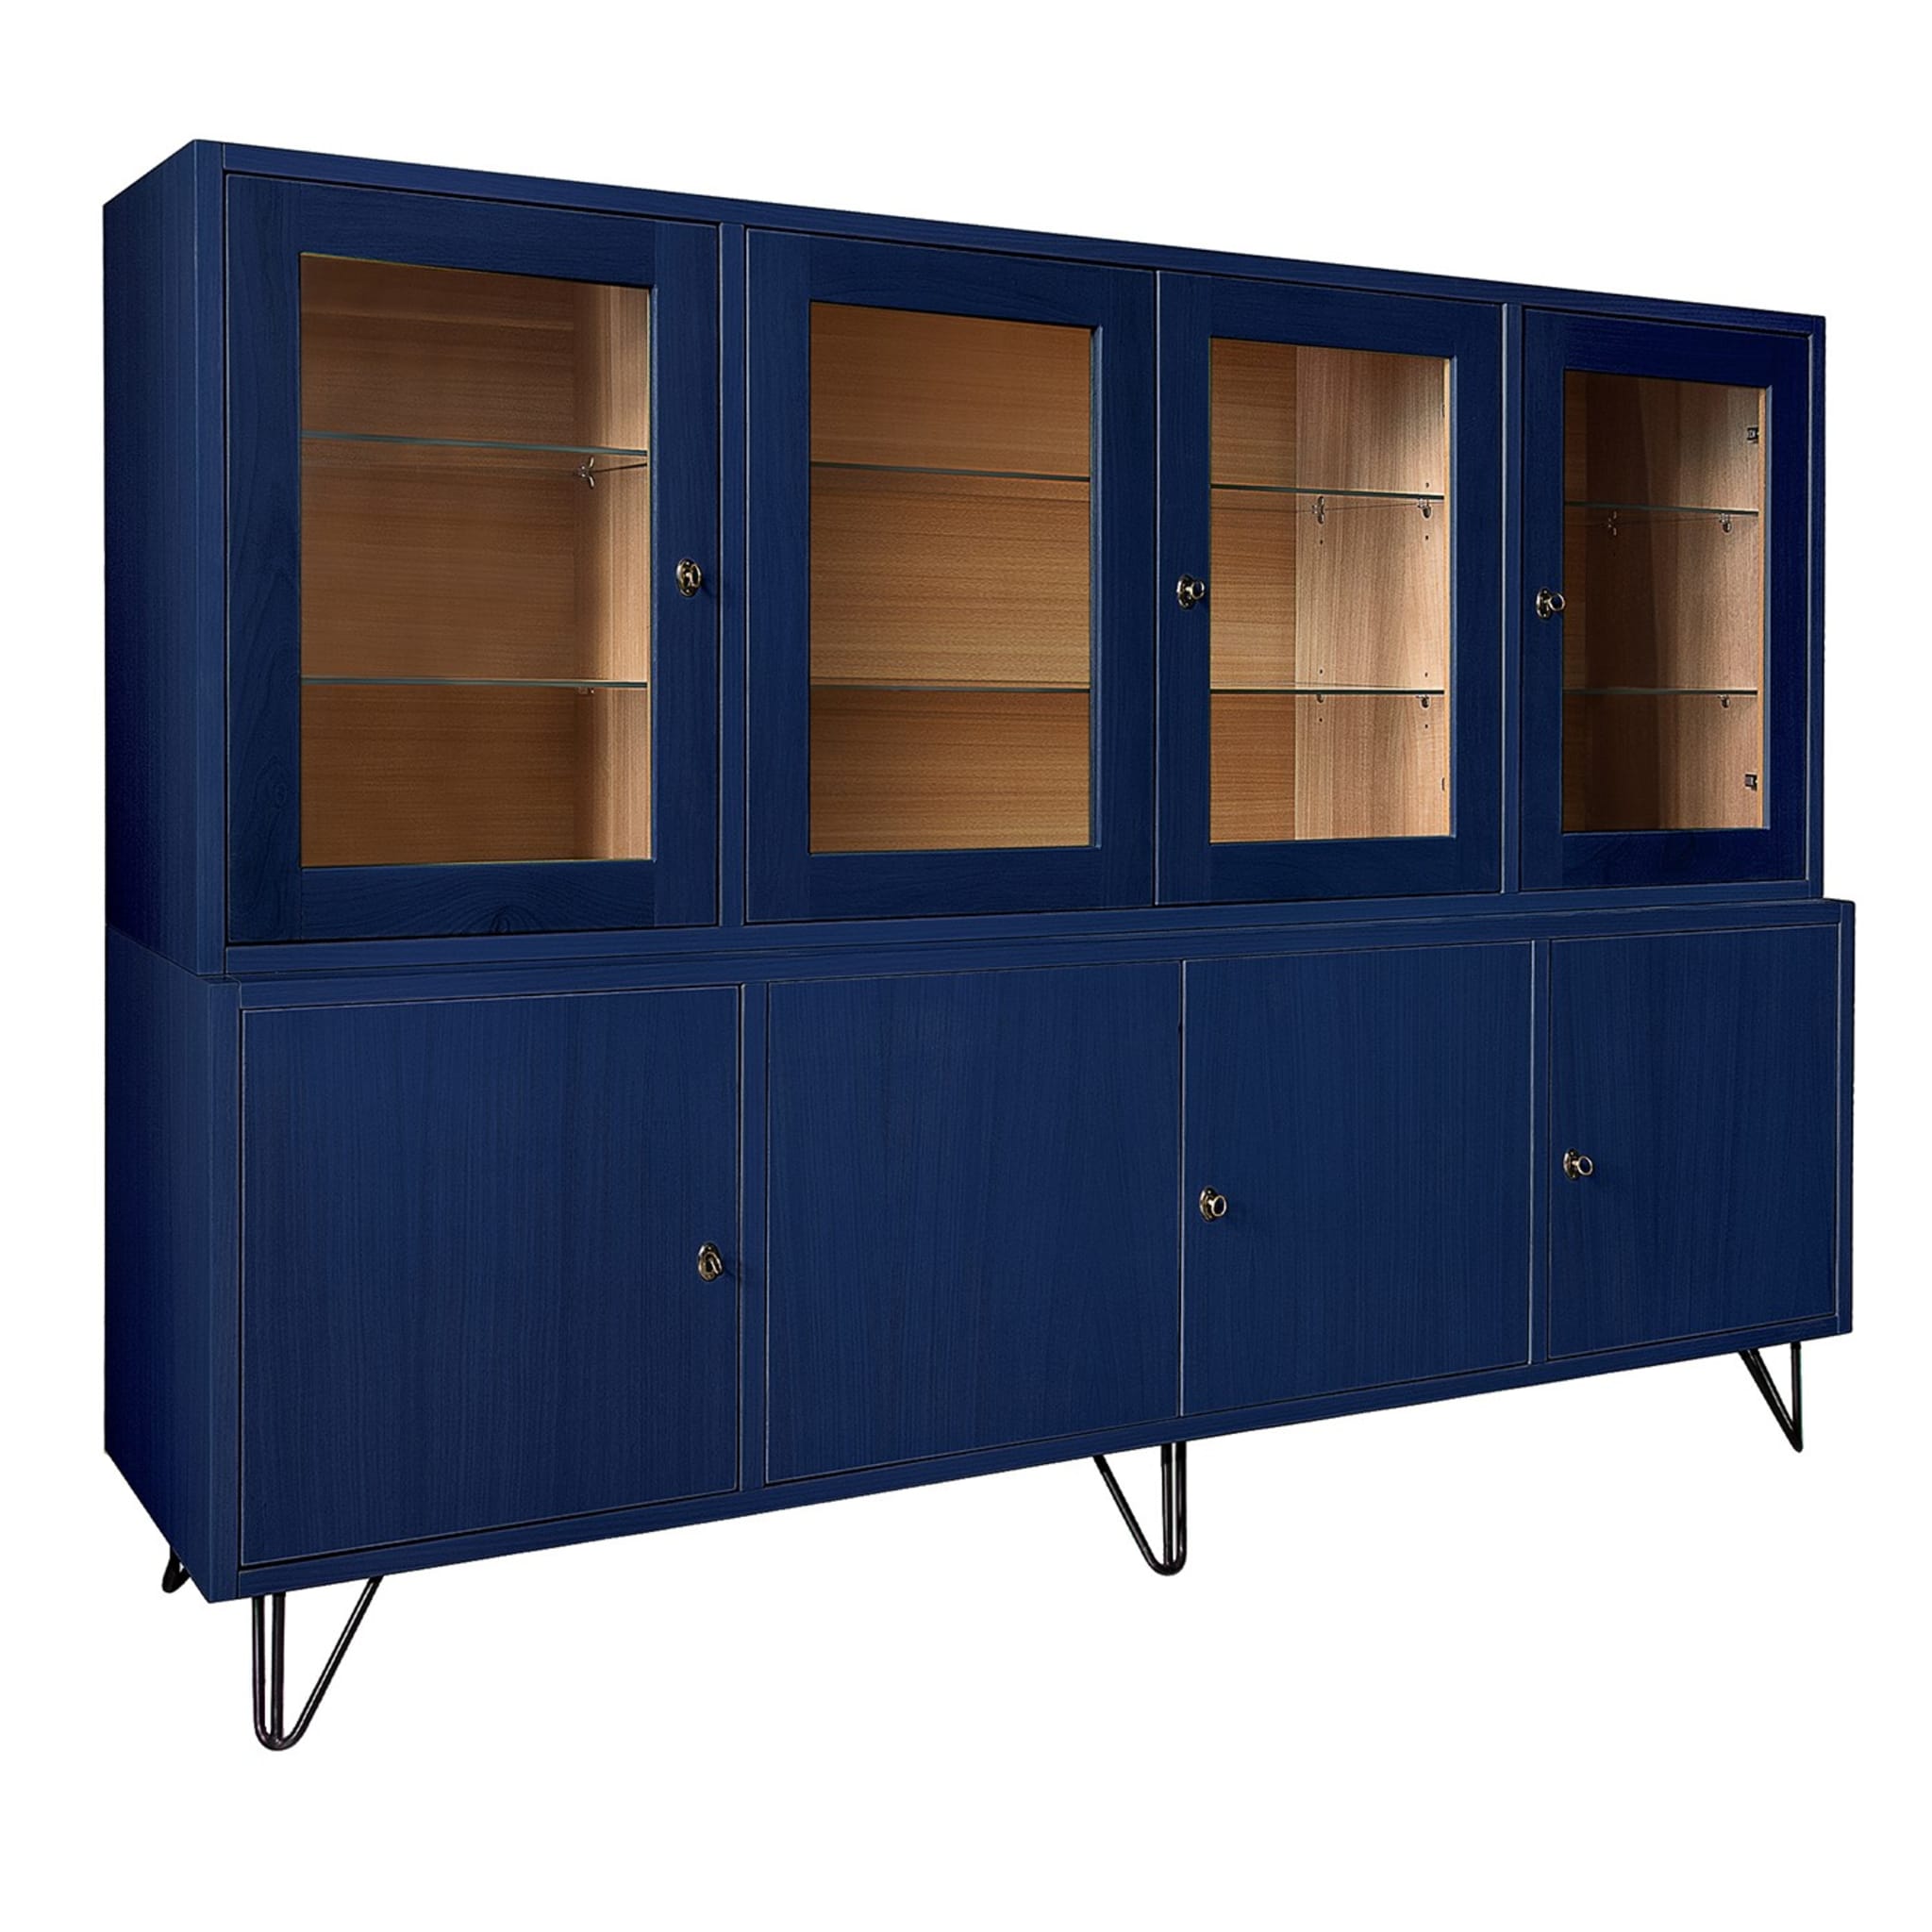 Eroica Blue Cabinet by Eugenio Gambella - Main view